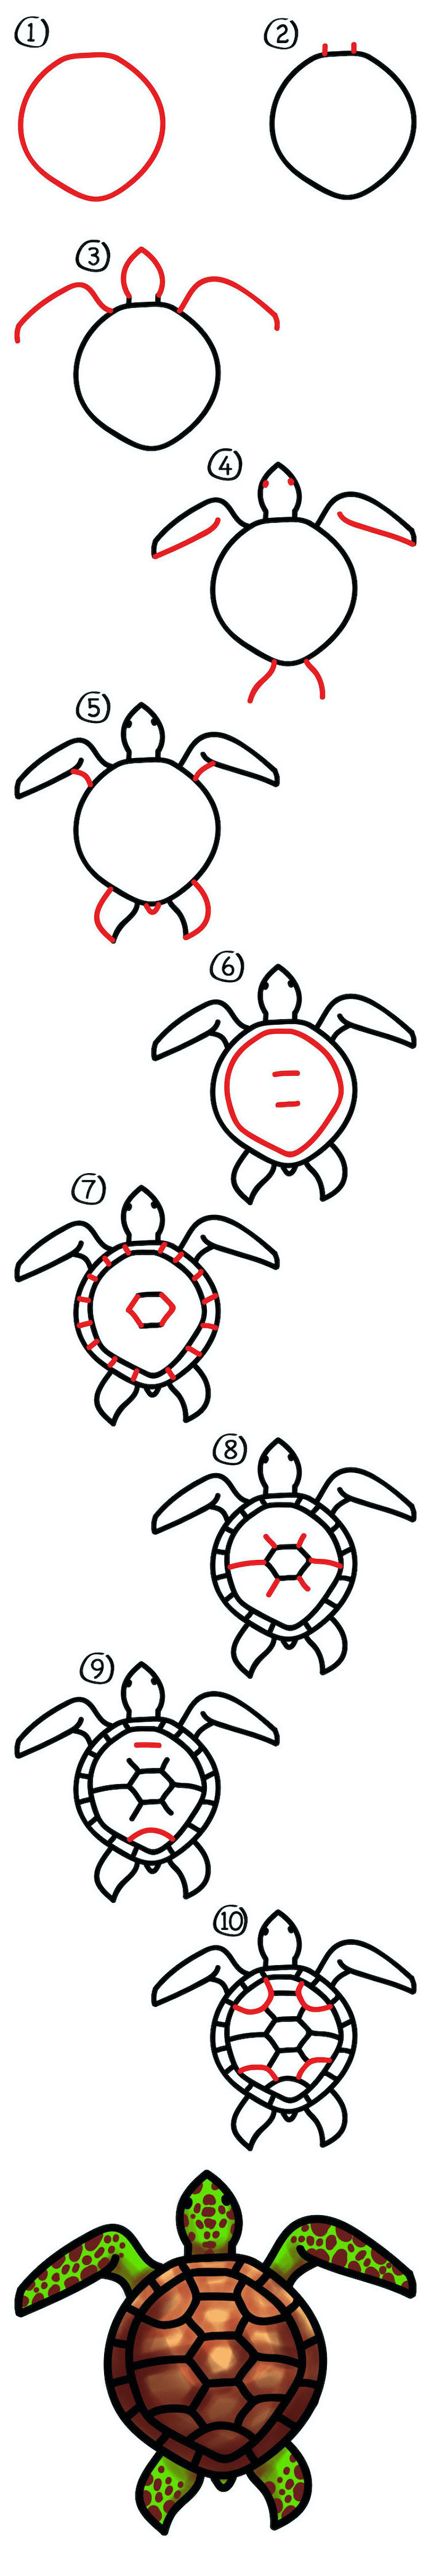 how to draw a turtle, step by step diy tutorial, cute drawings, sketch on white background